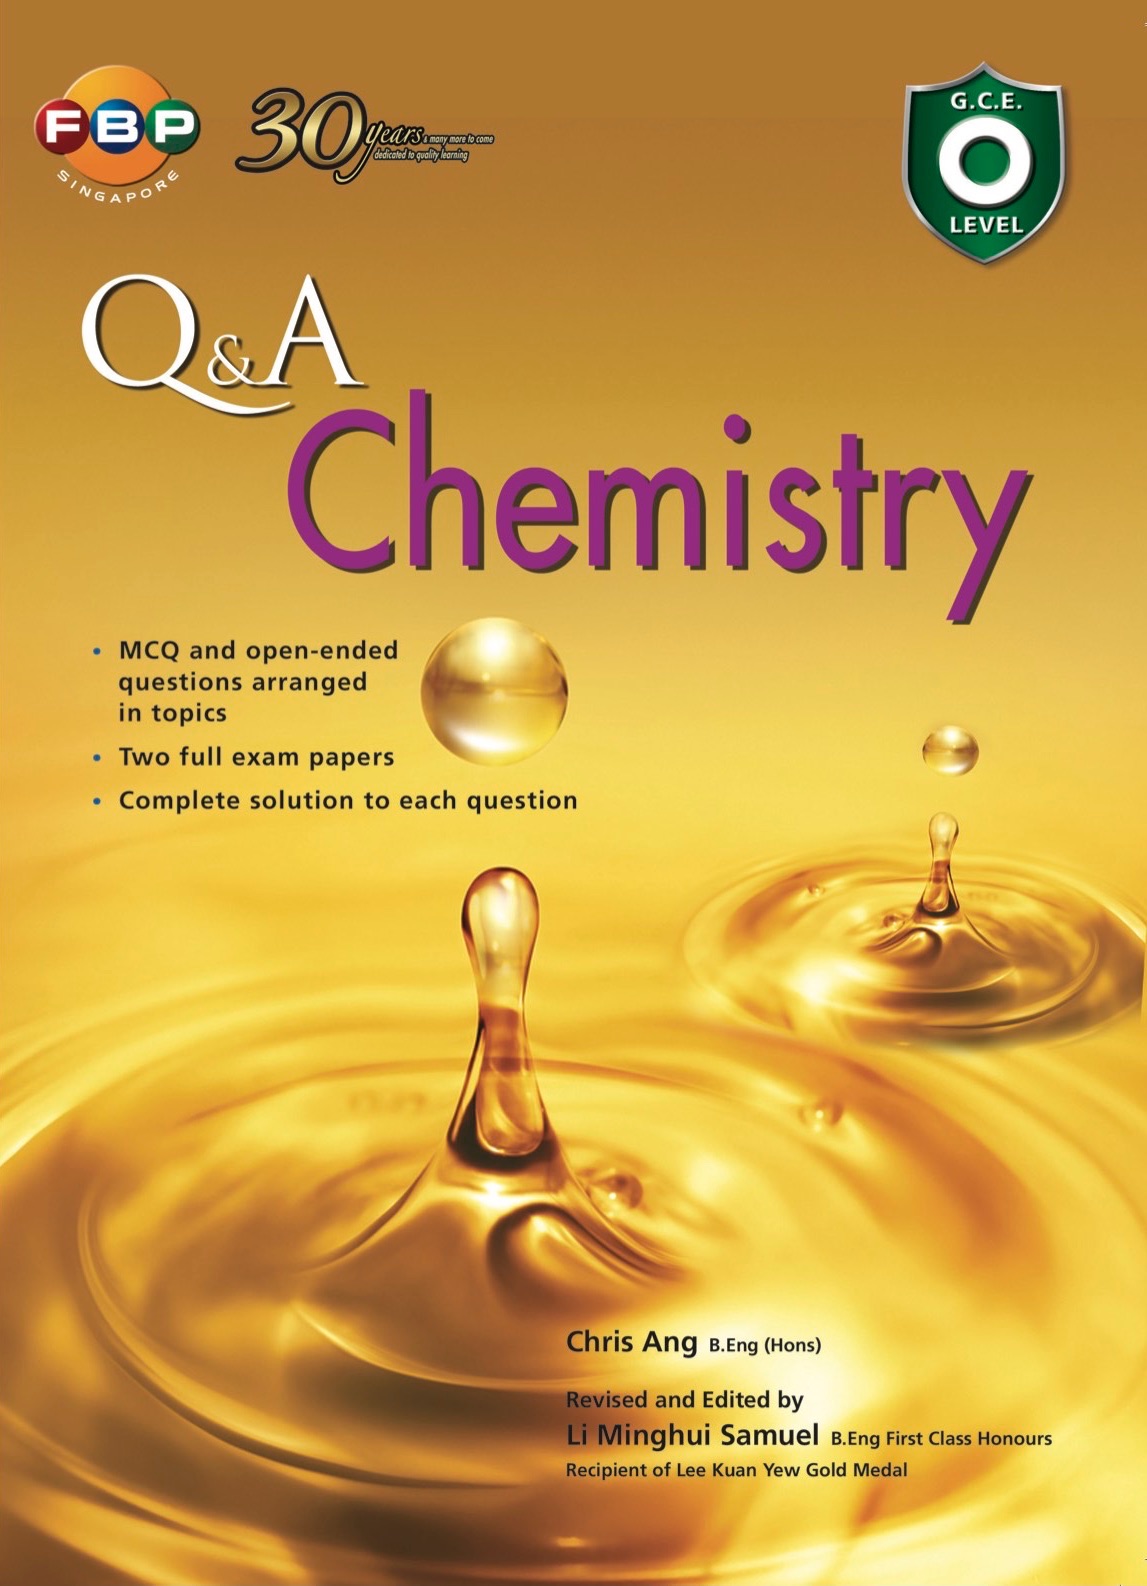 GCE O Level: Q&A - Pure Chemistry